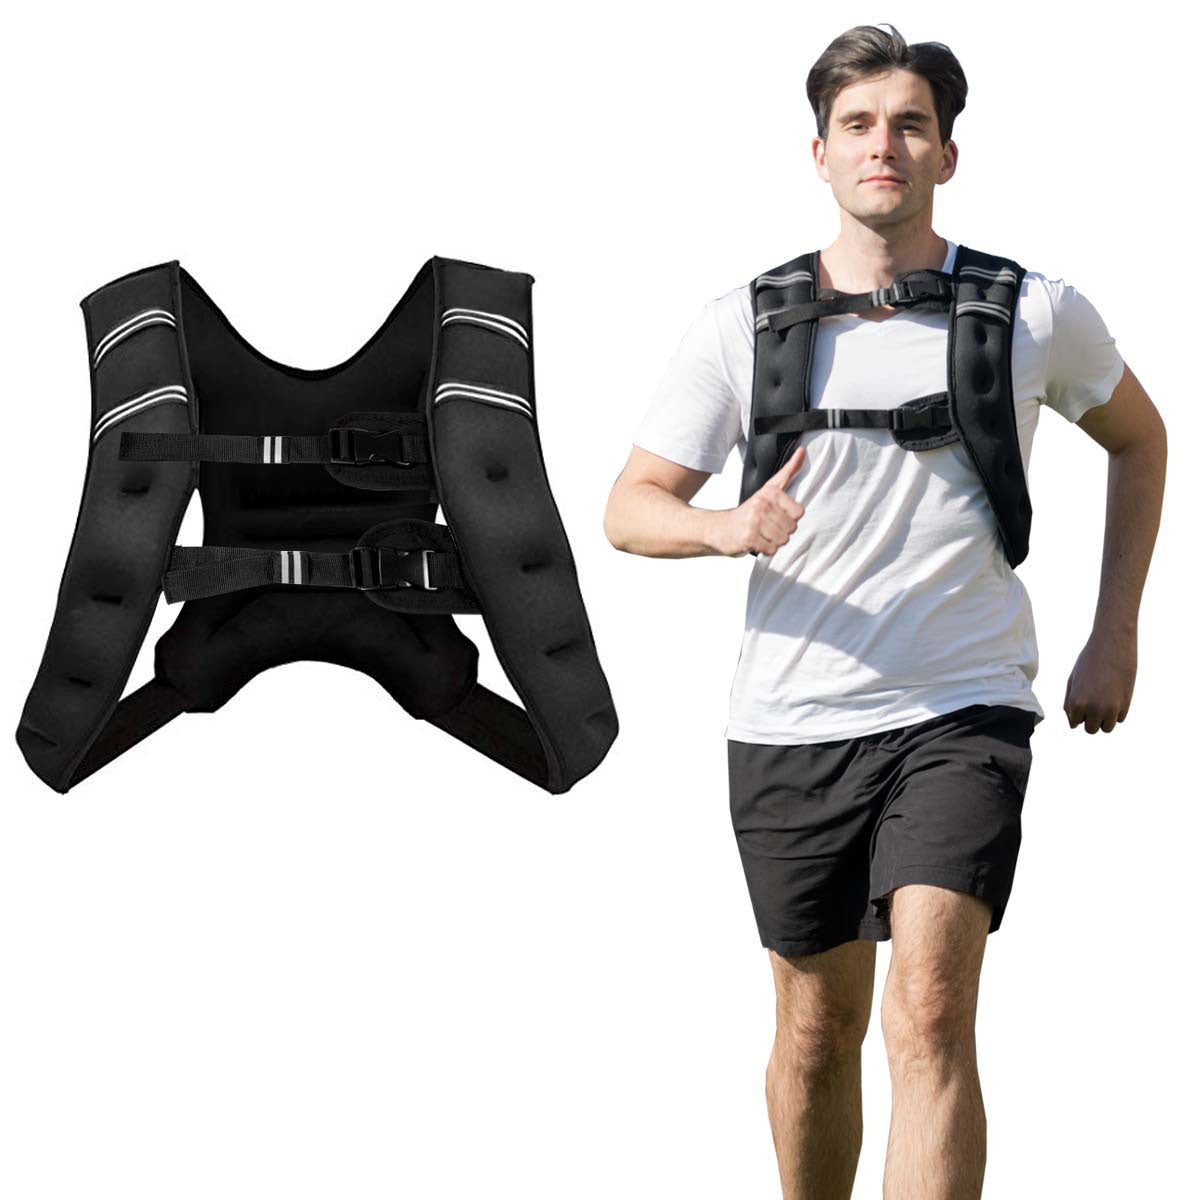 Weighted Vest W/Mesh Bag Adjustable Buckle For Resistance Running & Fitness Training